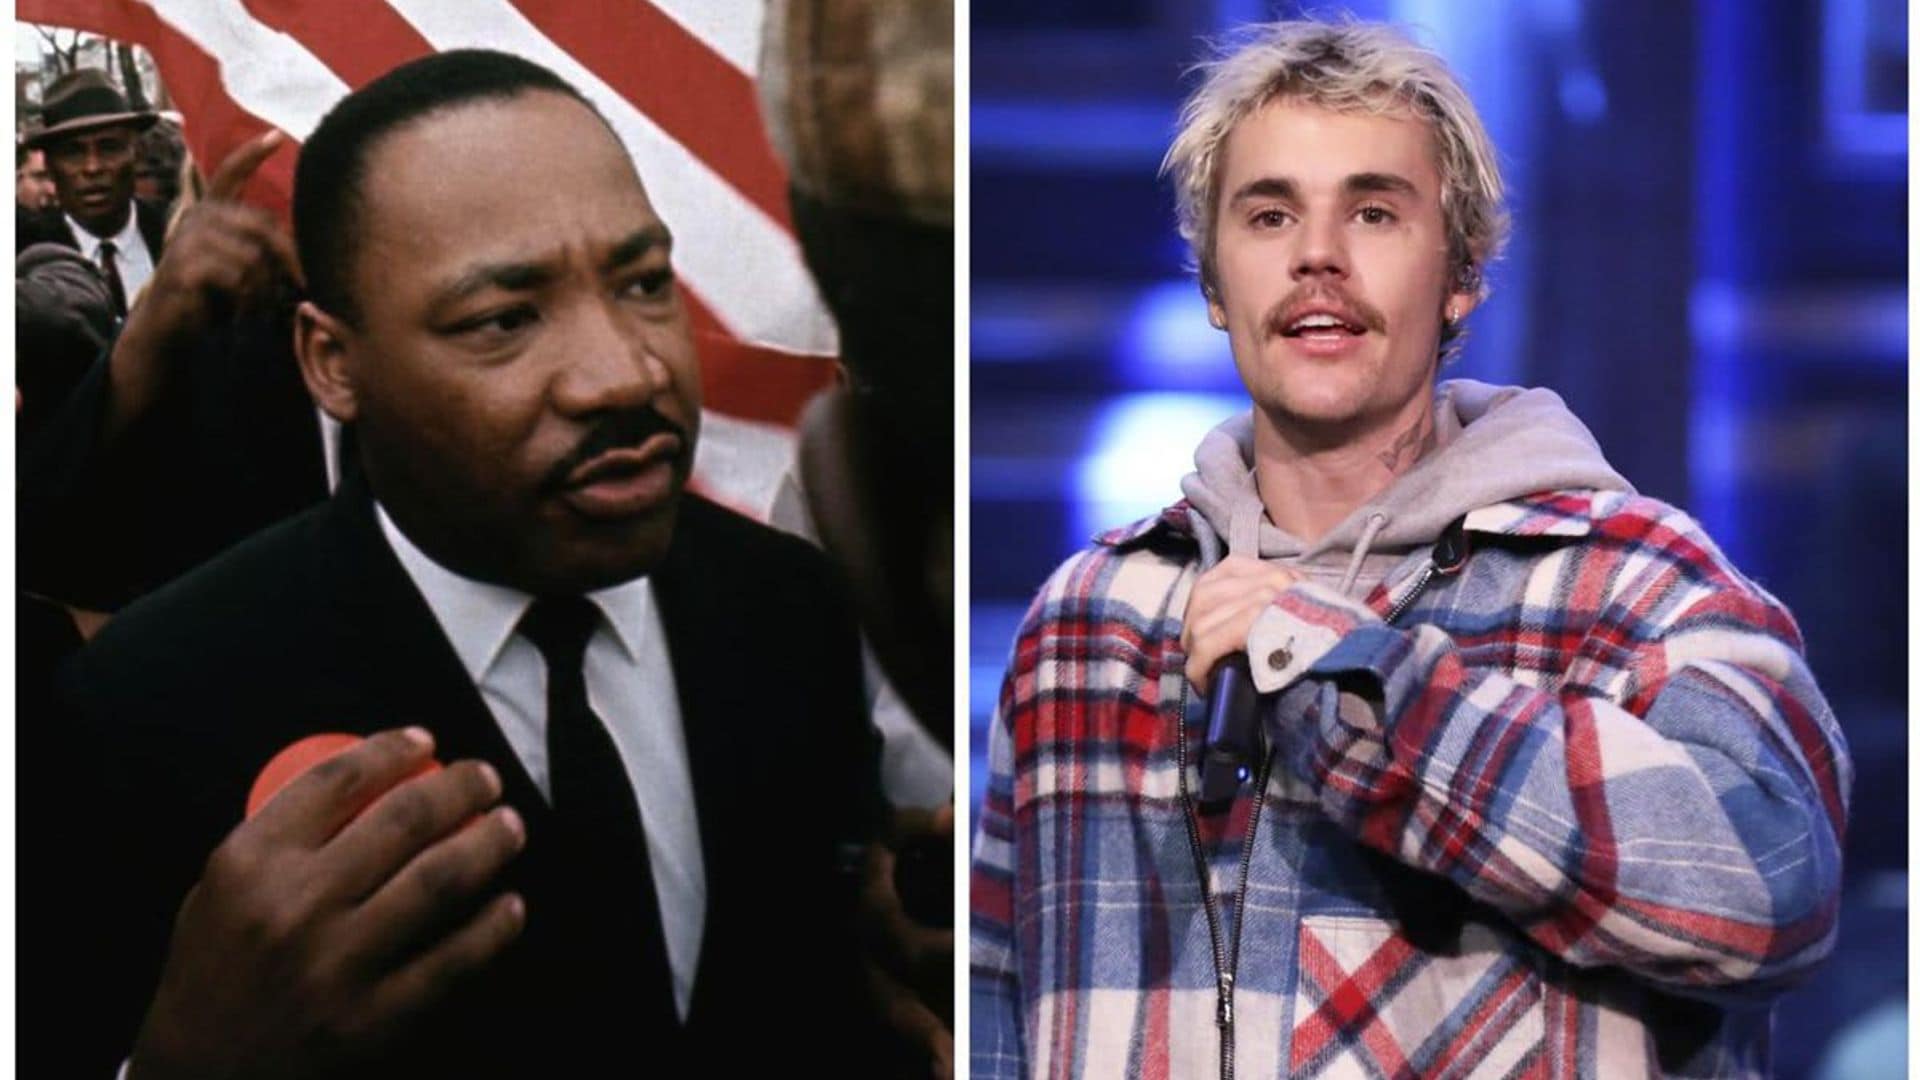 Justin Bieber responds to critics after Martin Luther King Jr. controversy